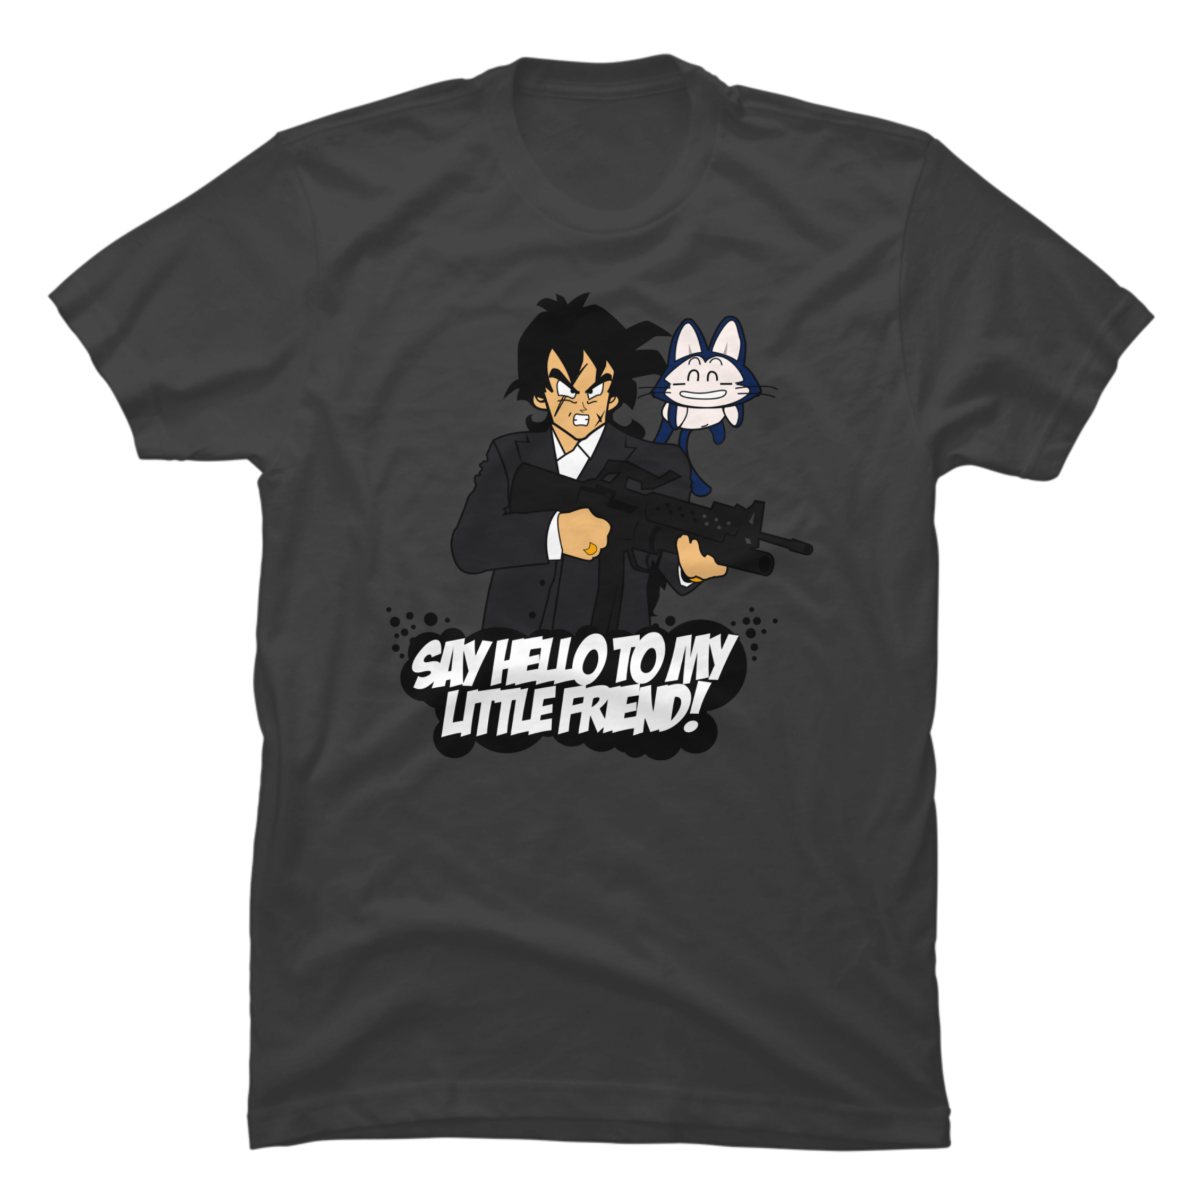 say hello to my little friend t shirts